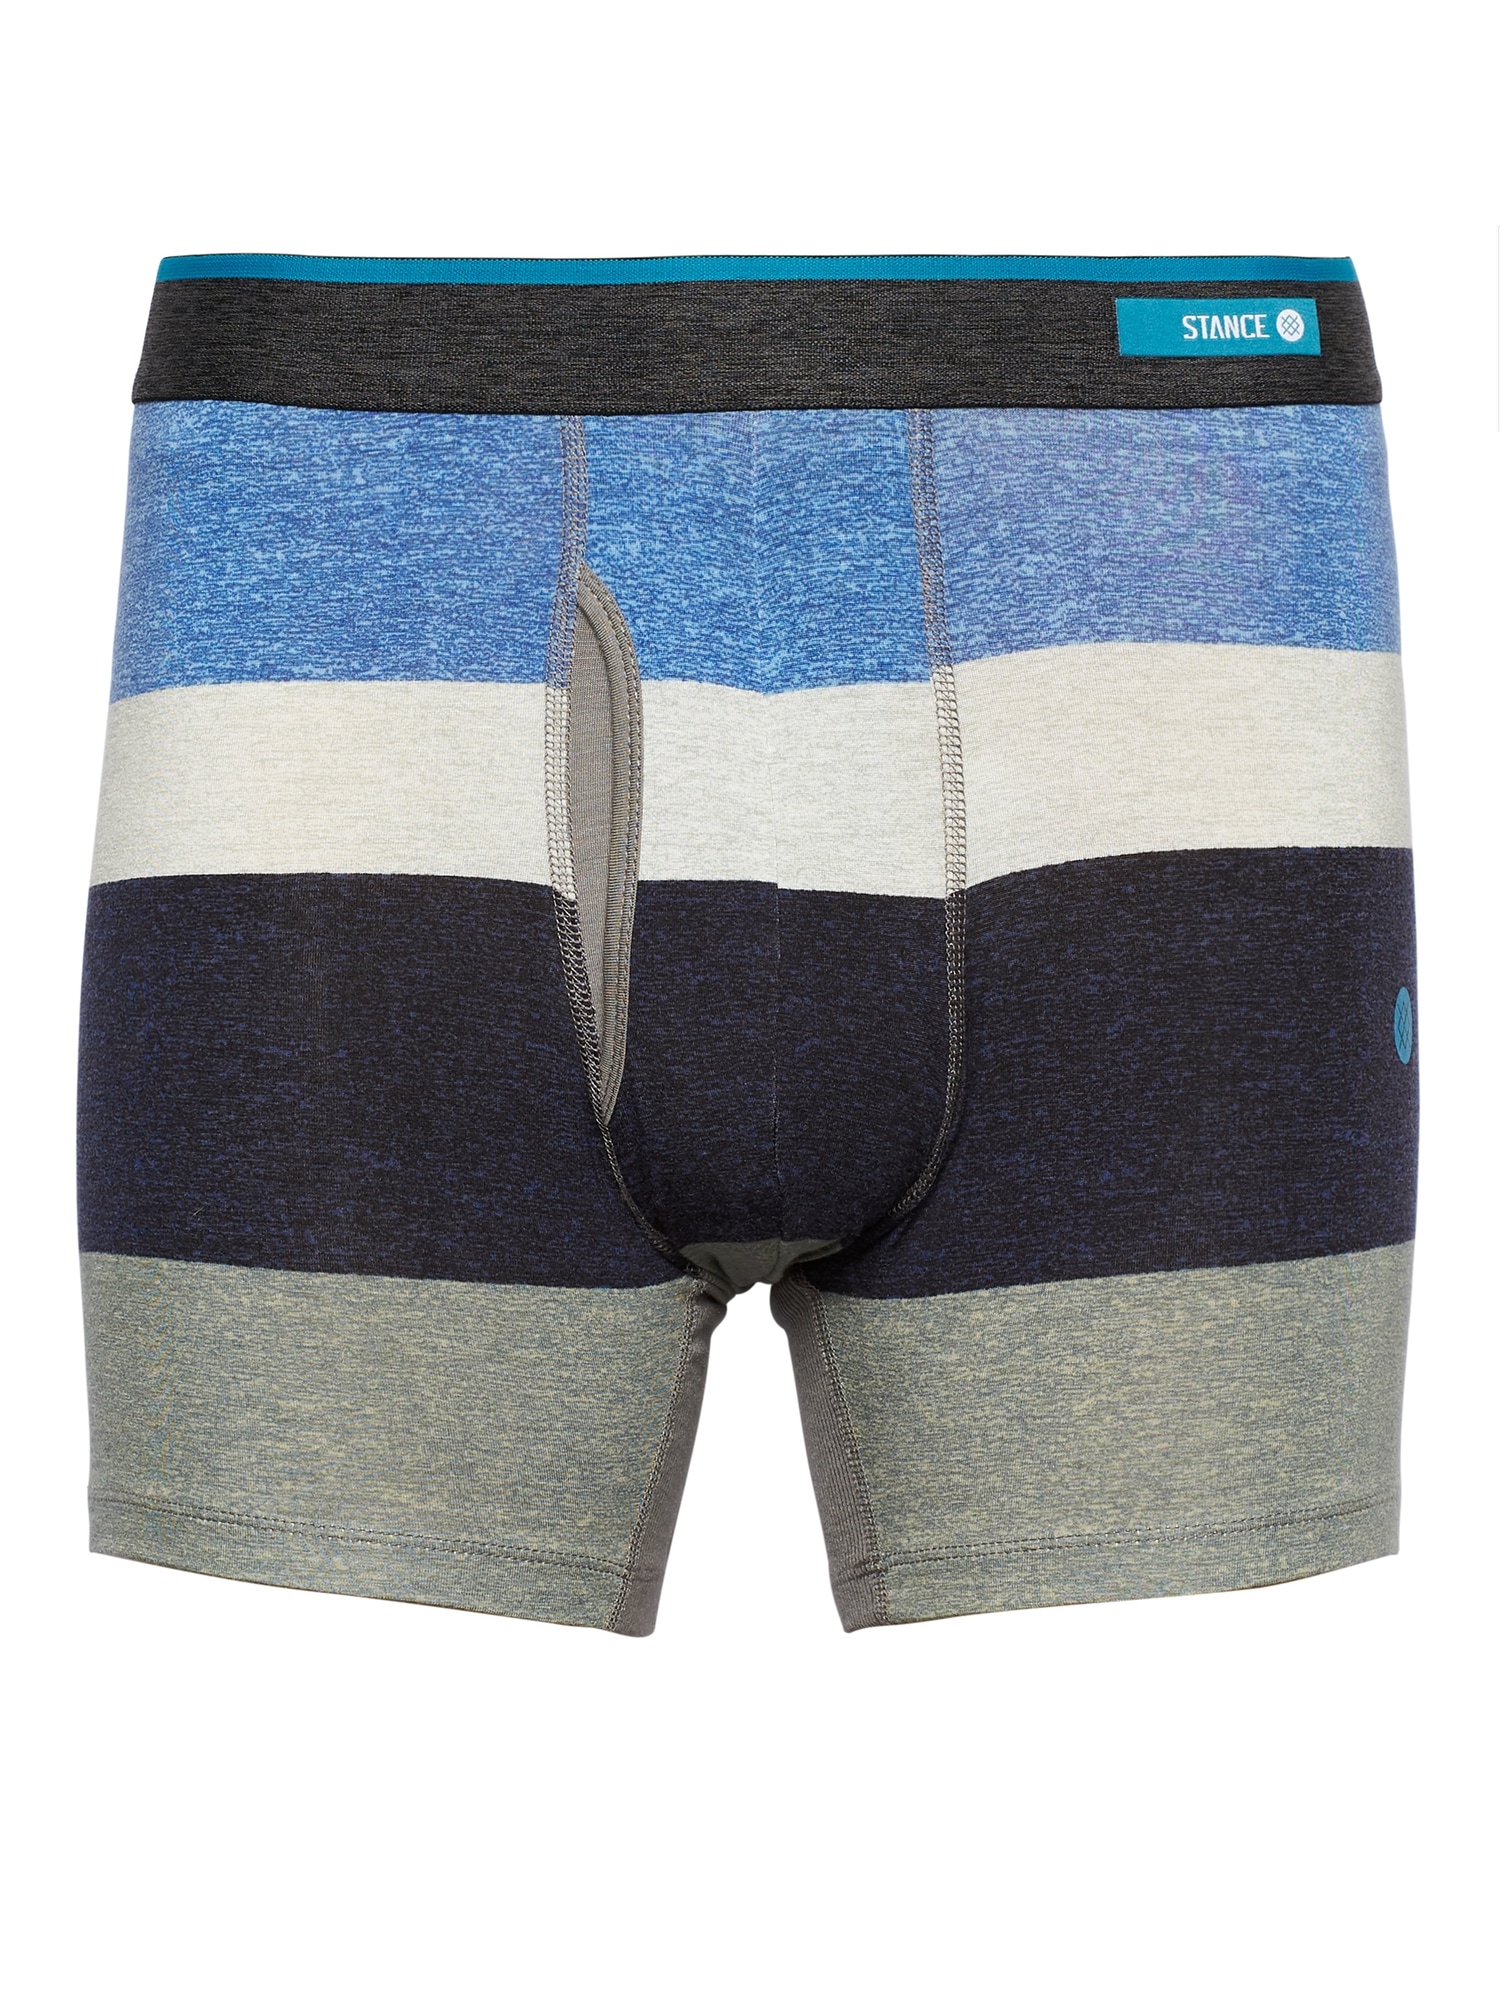 Stance &#124 Norm Boxer Brief